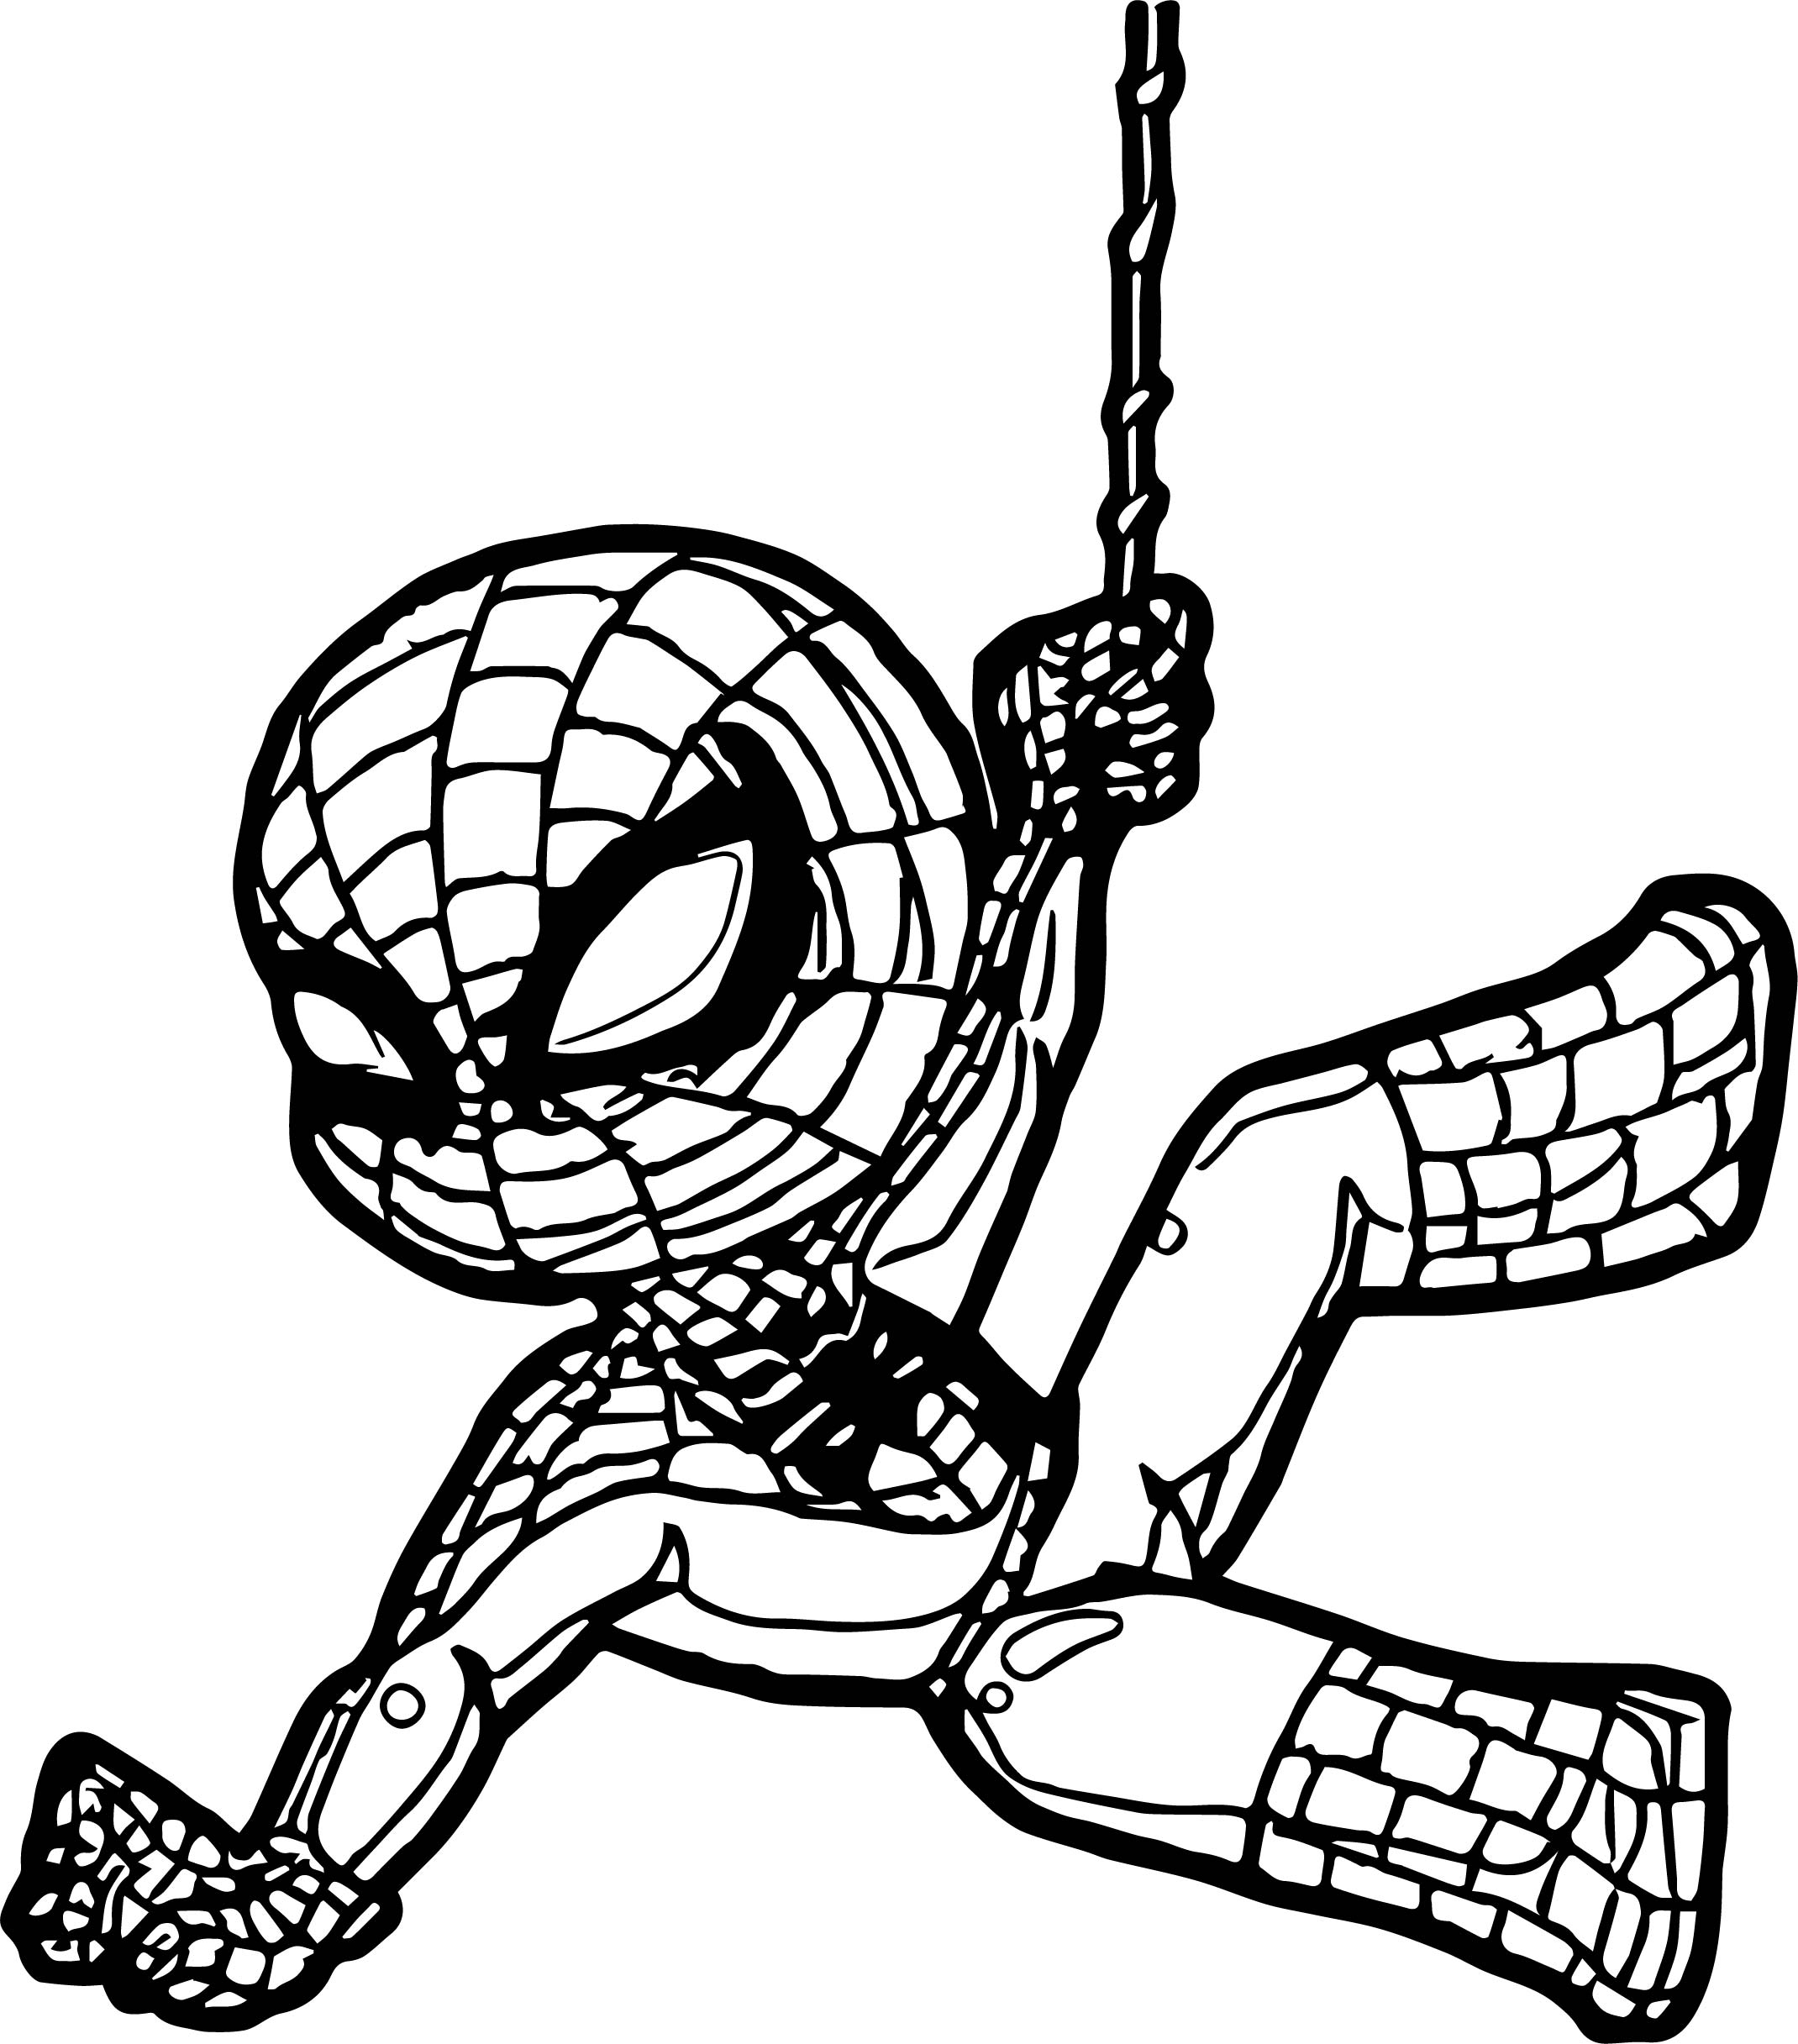 Baby Spiderman Coloring Pages at GetColorings.com | Free printable ...